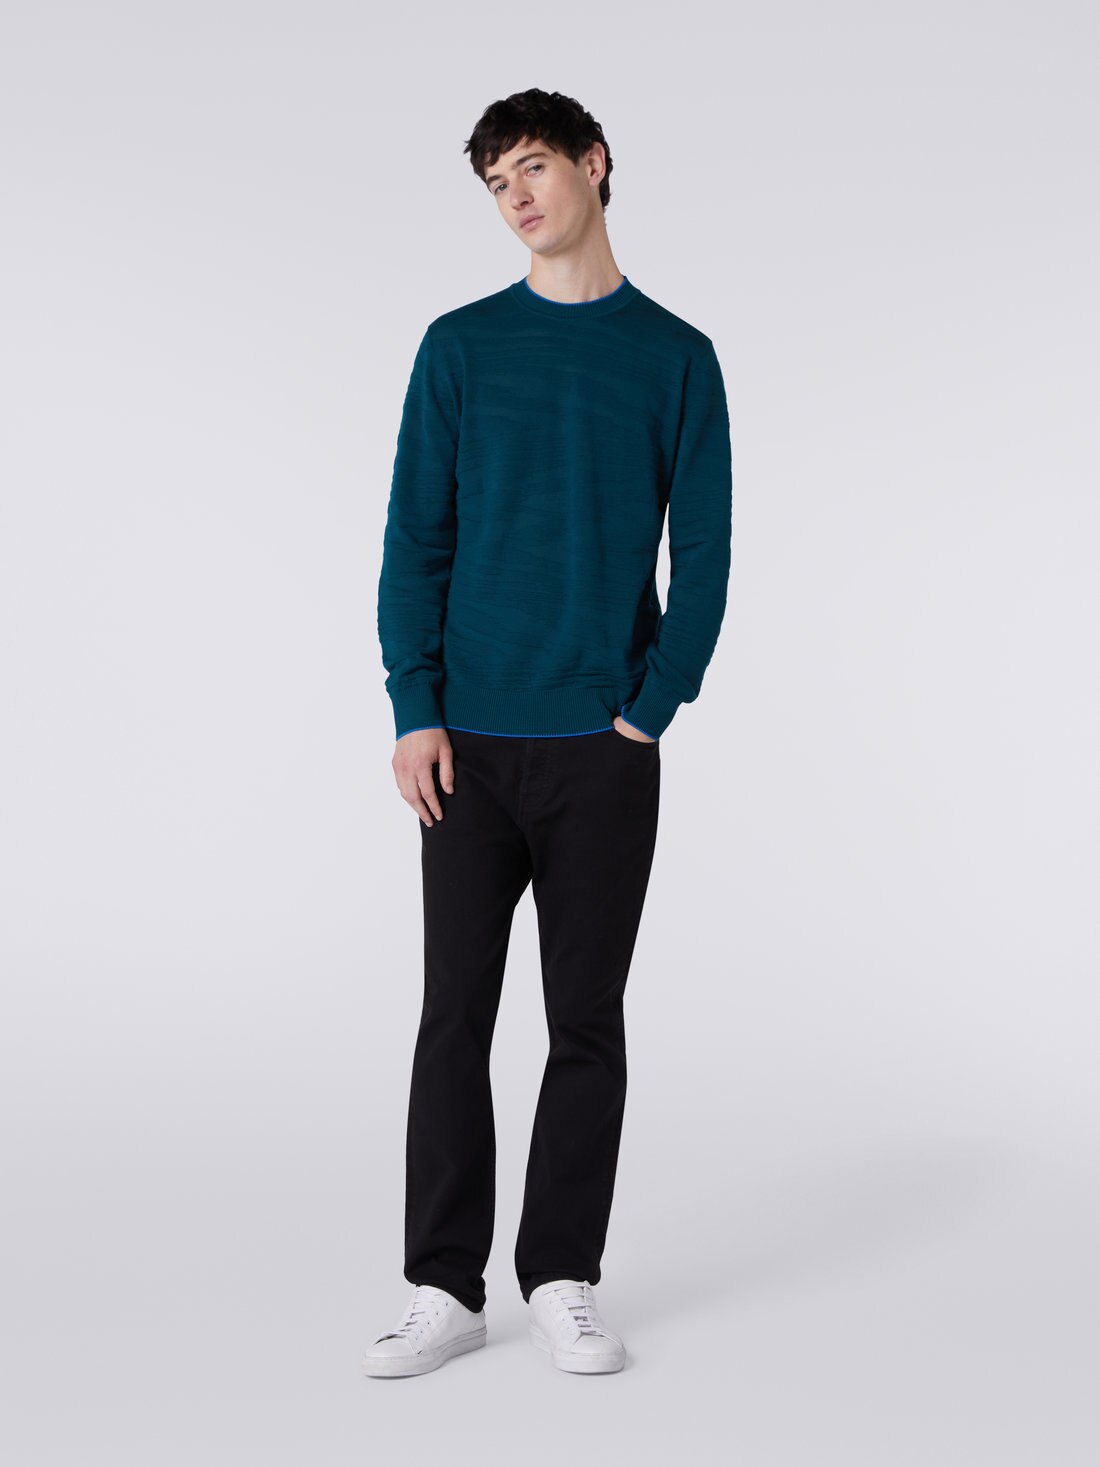 Embossed wool and viscose crew-neck pullover, Green  - UC23WN02BK021ZS611Q - 1